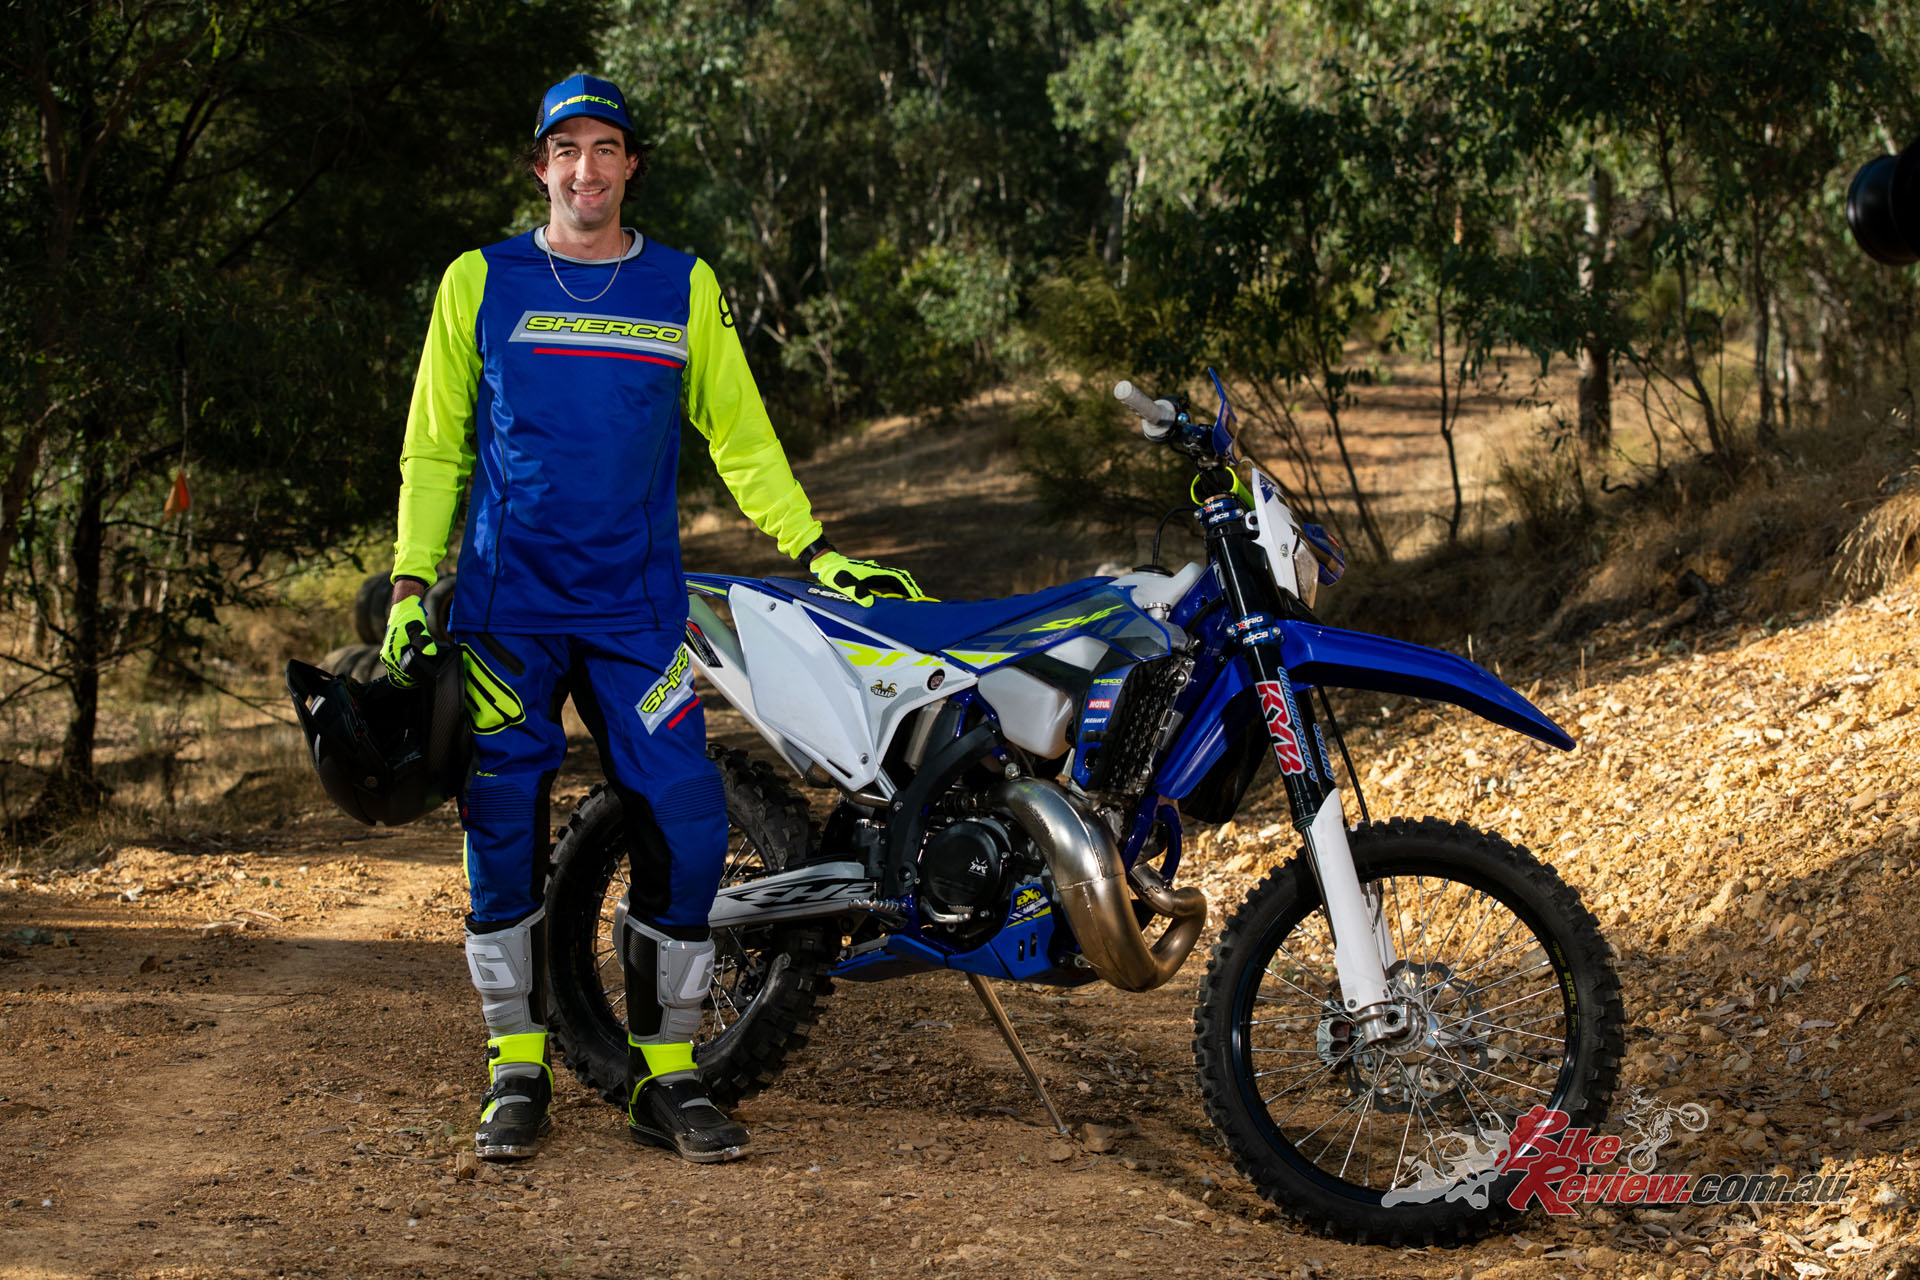 Tim Coleman will join Solar and Perry in the Australian Super Enduro Championship aboard the 250 SE Factory.